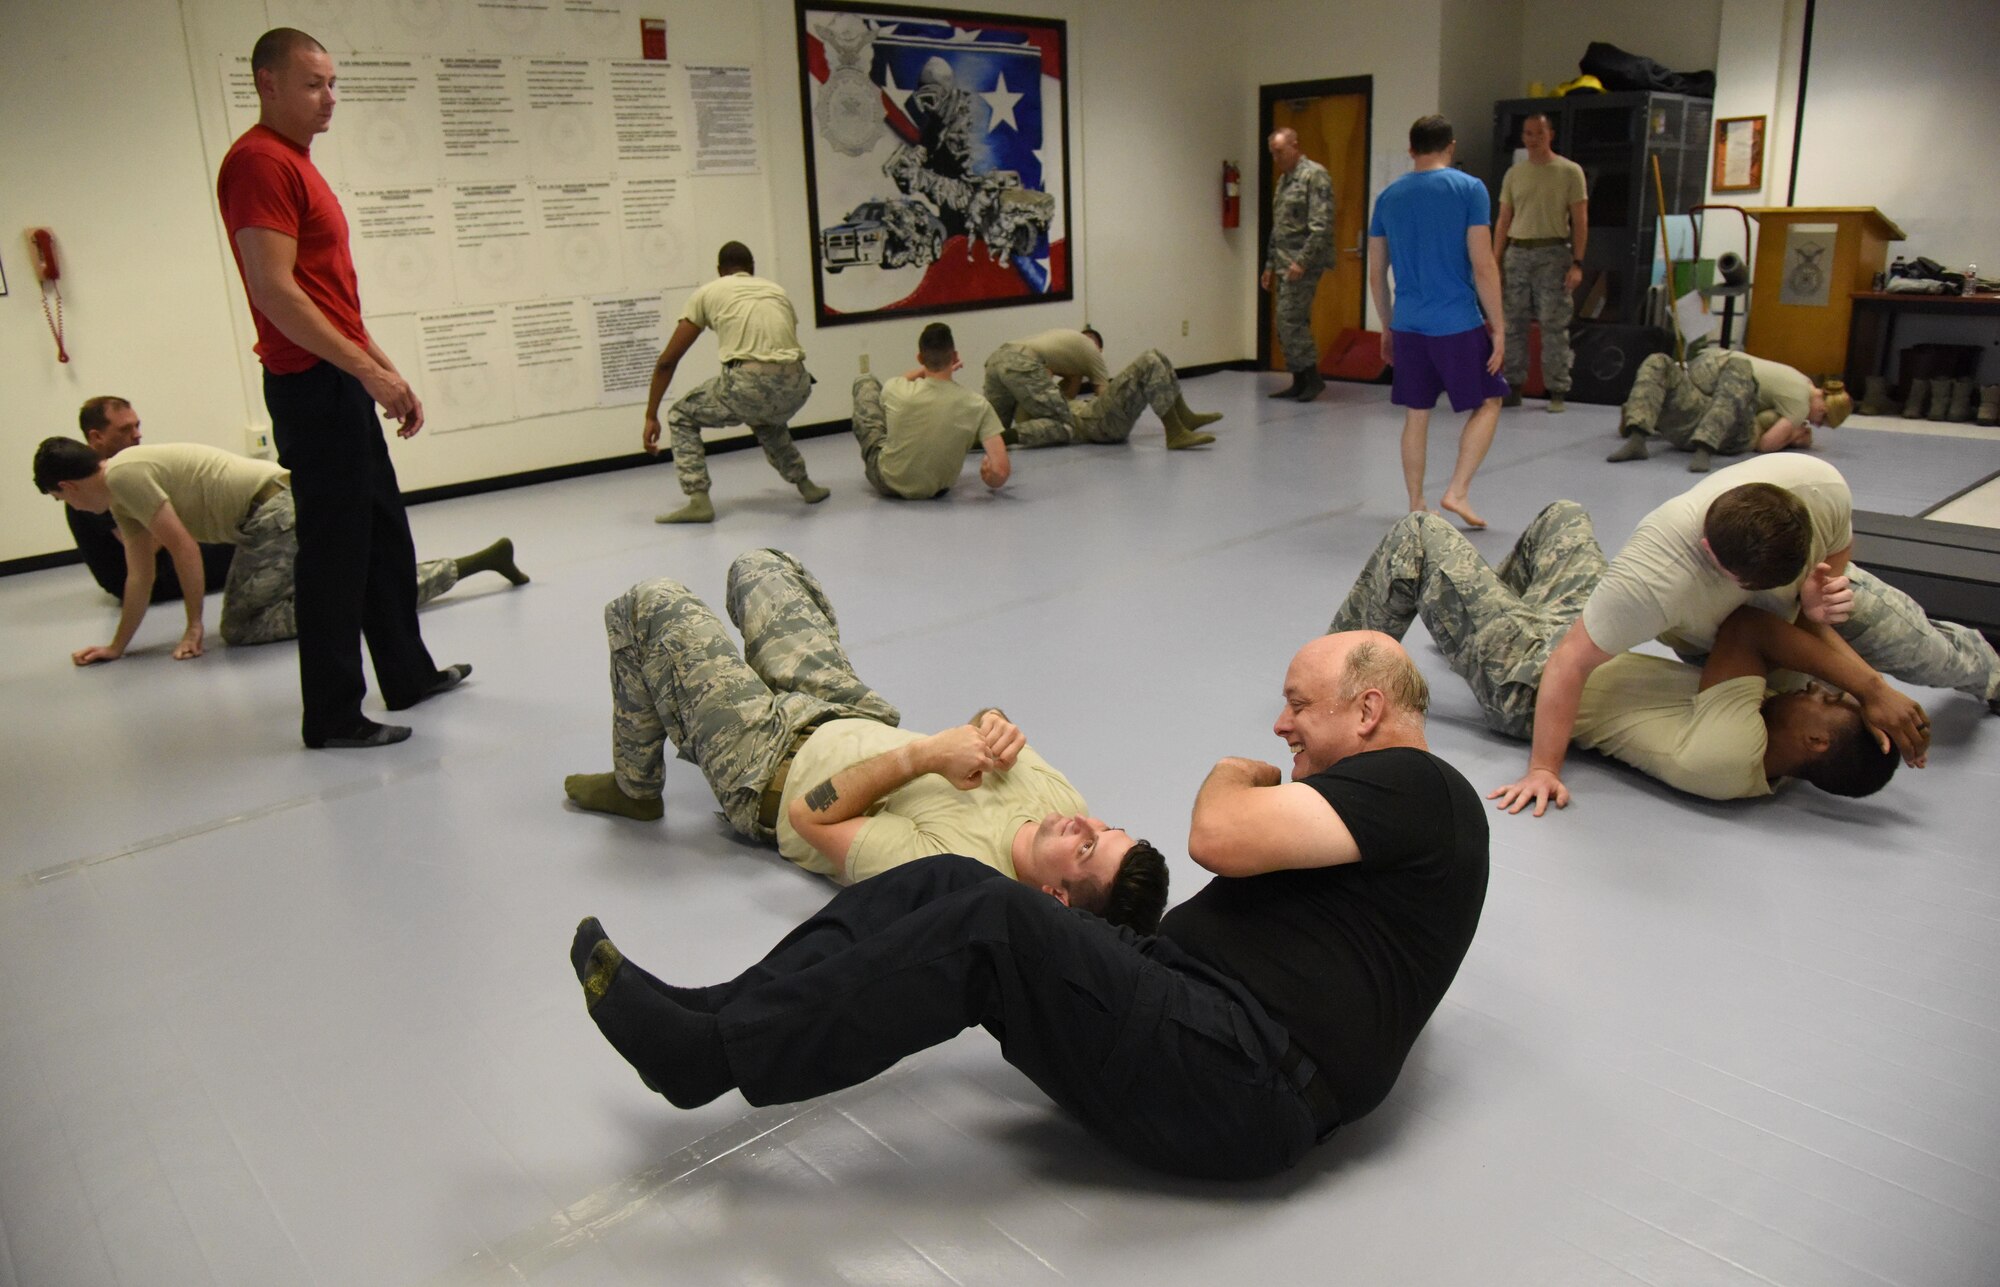 Members of the 81st Security Forces Squadron practice combative techniques during an 81st SFS combative training course at the SFS building Oct. 19, 2017, on Keesler Air Force Base, Mississippi. Approximately 15-20 defenders were taught skills vital to surviving a hand-to-hand ground fight using mixed martial arts and Jiu Jitsu techniques as another tool to survive a confrontational environment. (U.S. Air Force photo by Kemberly Groue)